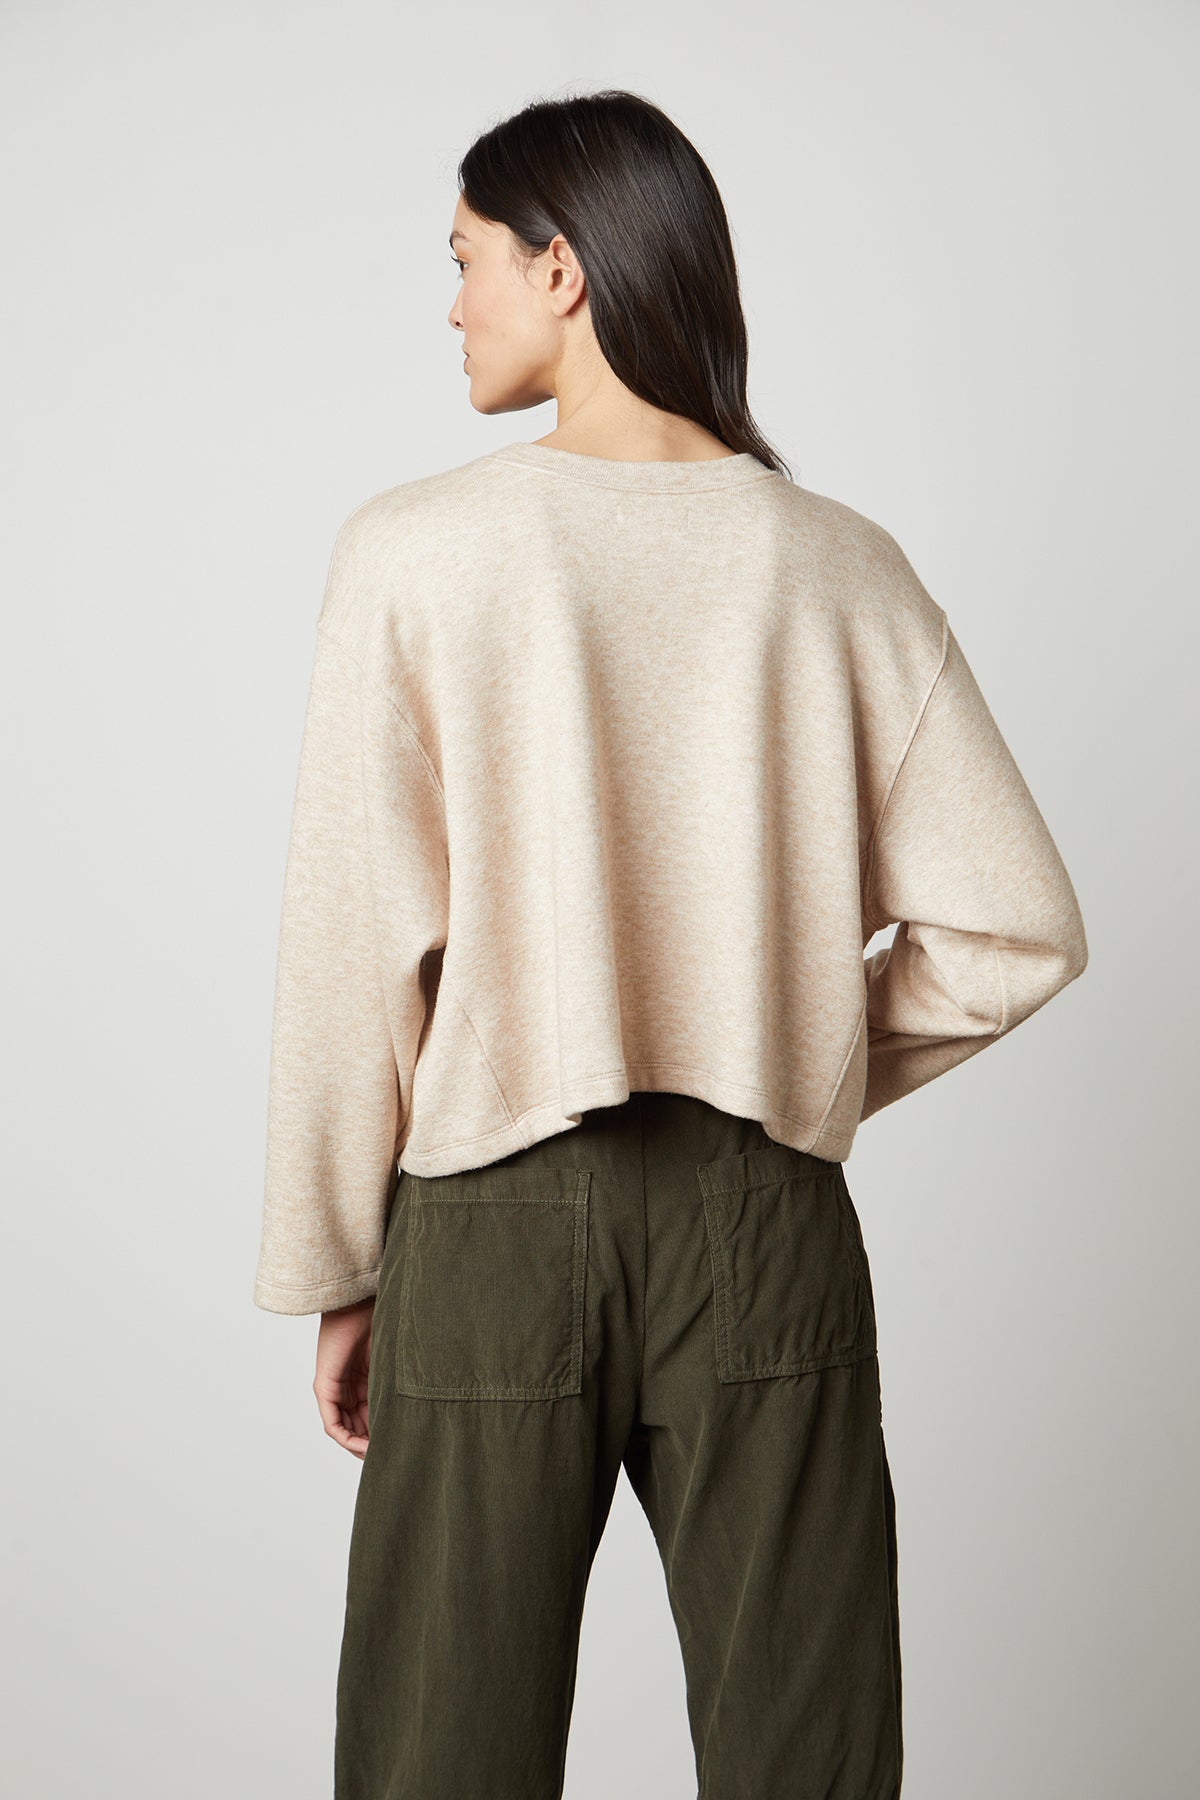 The back view of a woman wearing an oversized beige NIA DOUBLE KNIT CROPPED CREW sweater and olive pants, exuding style and comfort. (Brand Name: Velvet by Graham & Spencer)-35503558918337